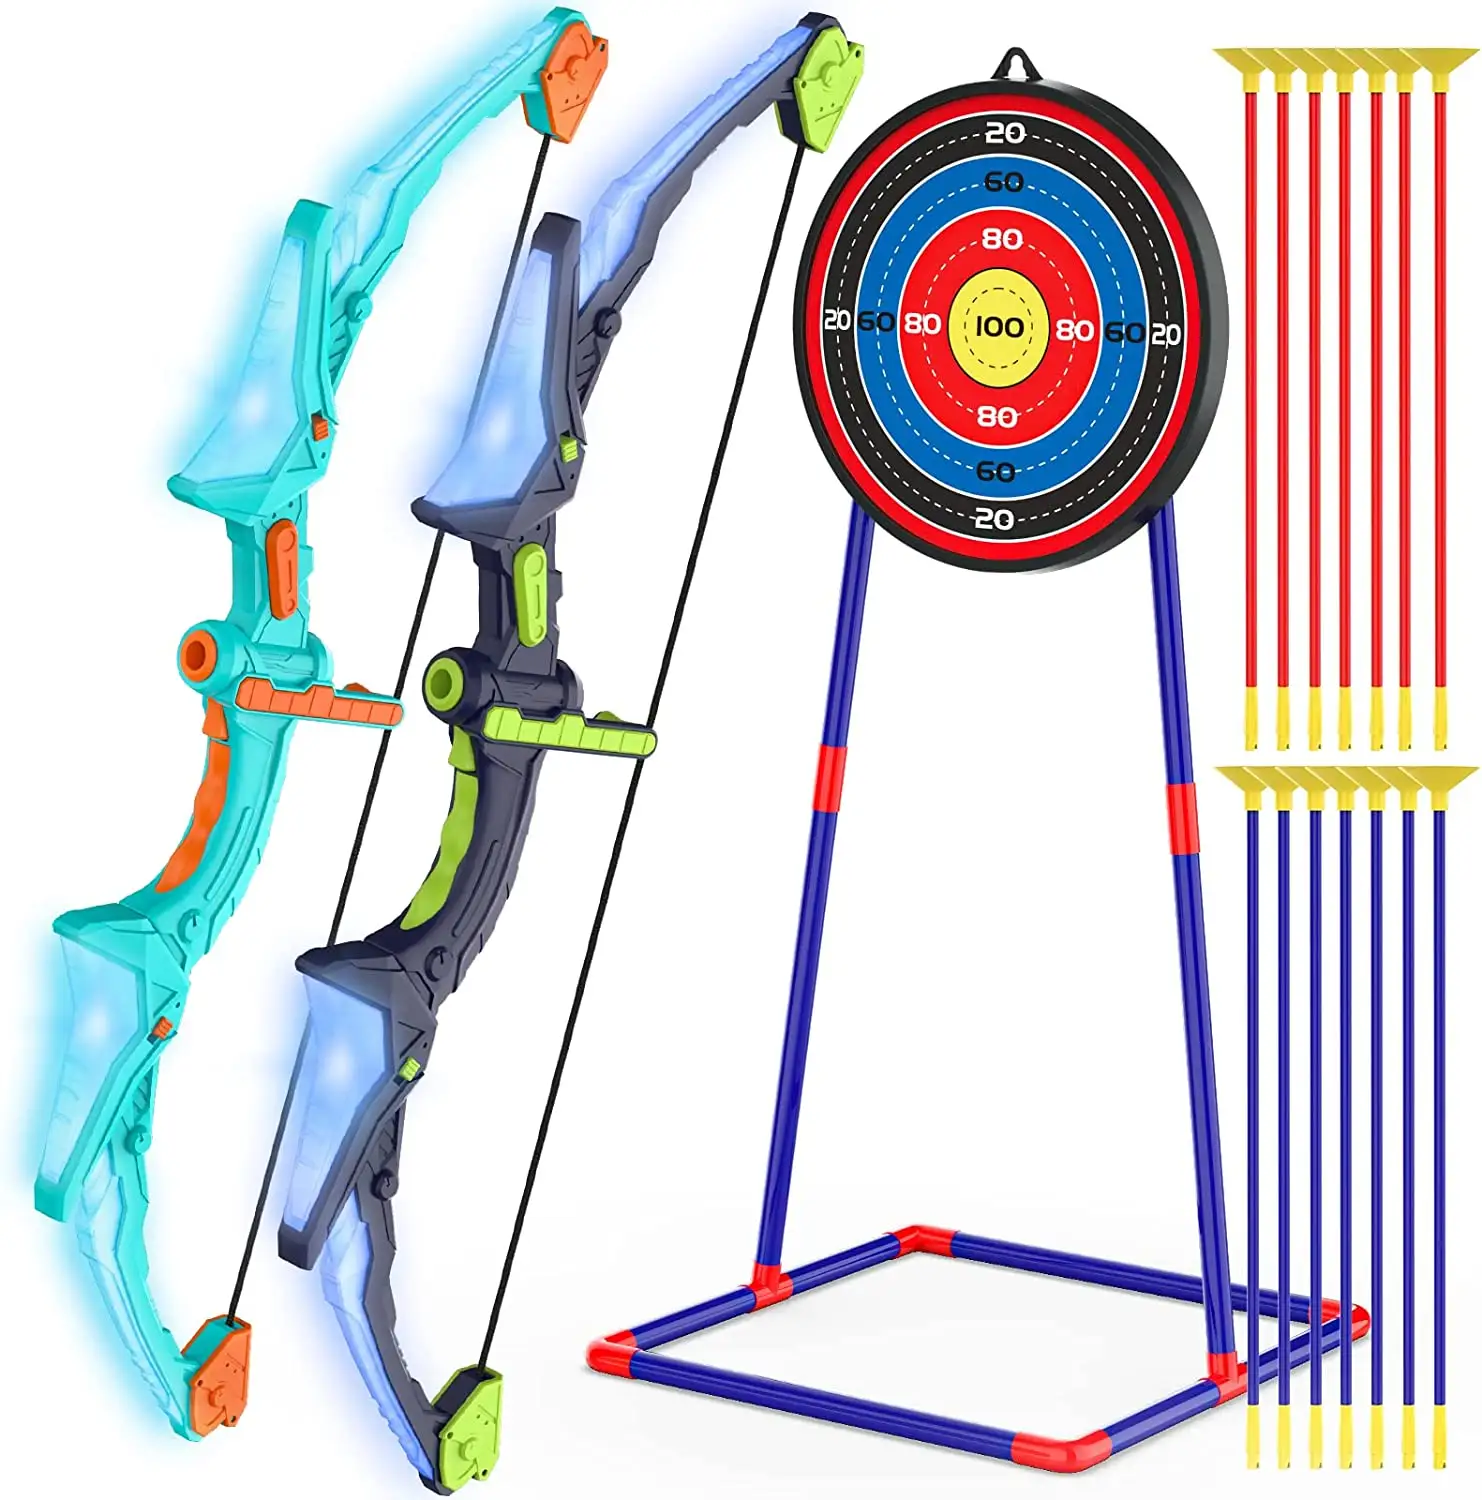 LED Light Up Kids Indoor Outdoor Shooting Games Archery Target Hunting Play Gift Toys Bow And Arrow Set With Suction Cup